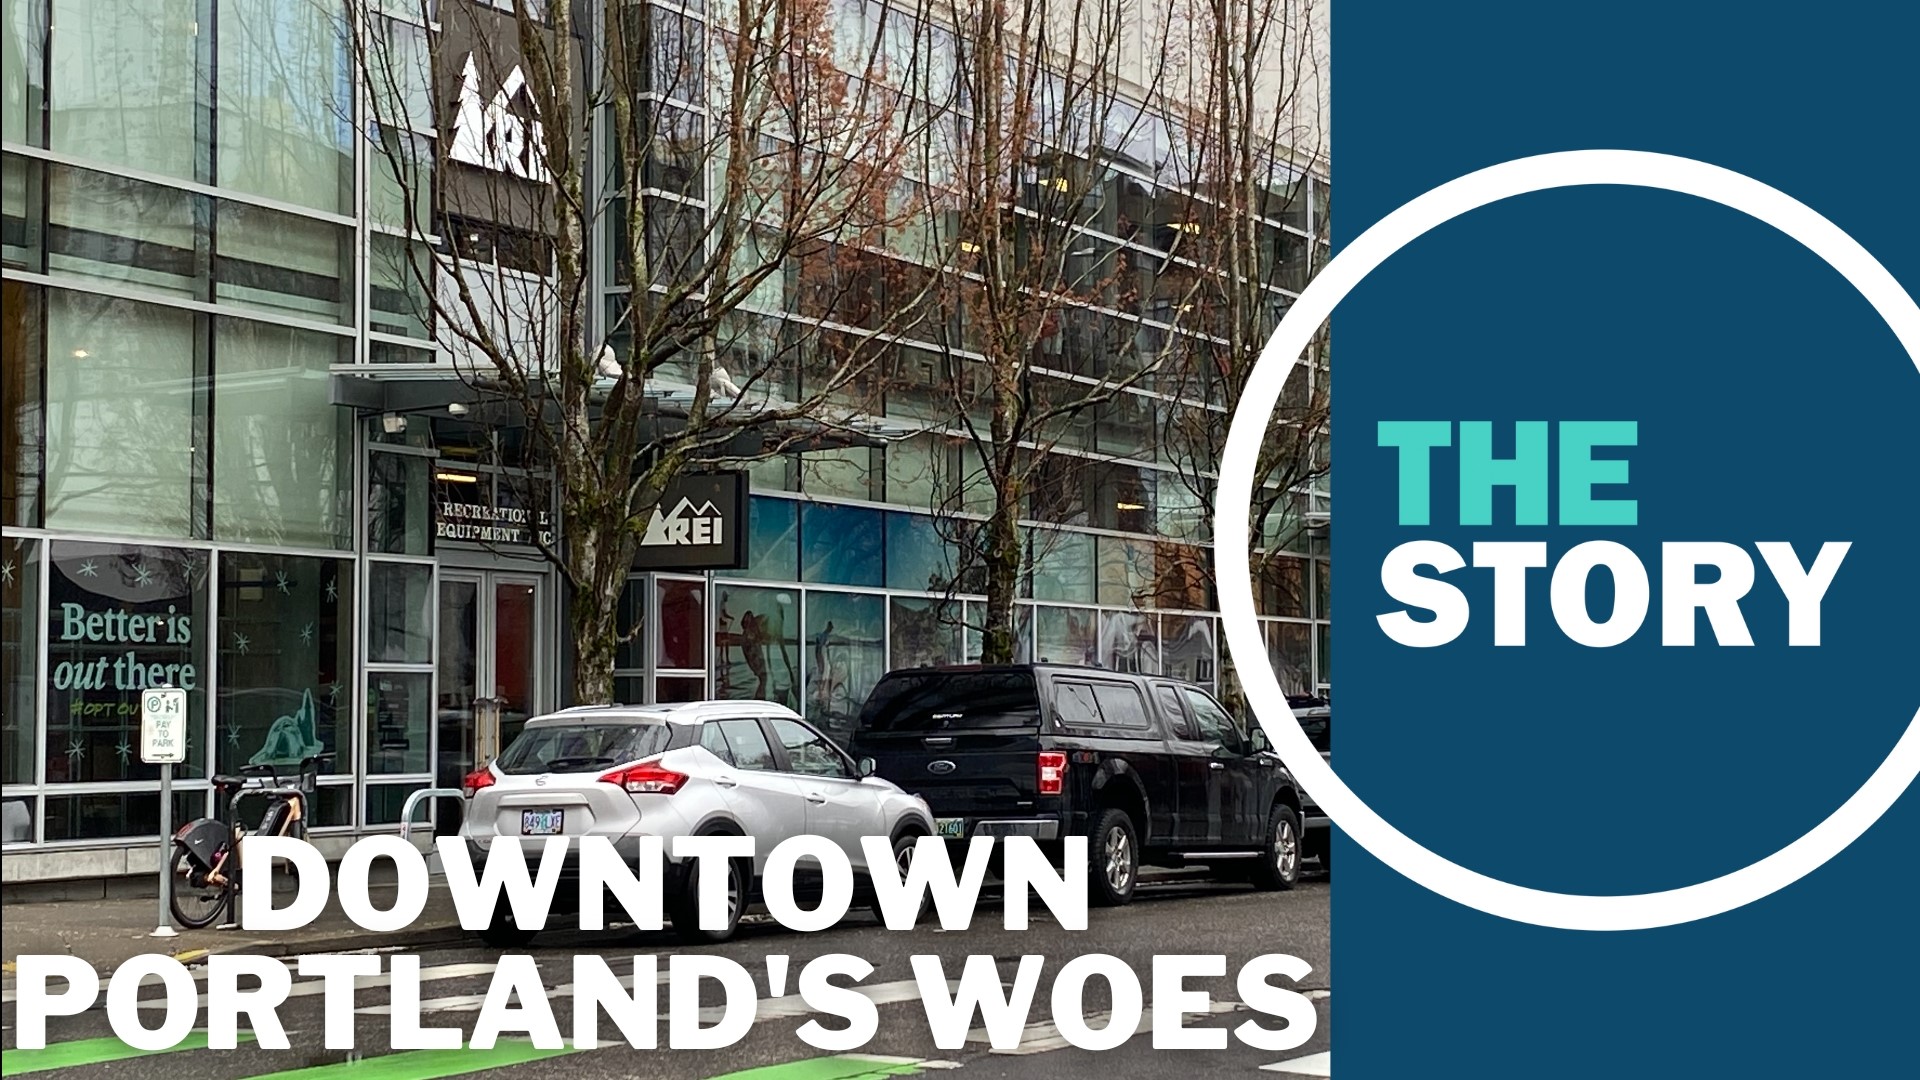 REI announced its plan to vacate the longtime downtown location. Meanwhile, newcomer Shake Shack got vandalized before it had a chance to open.